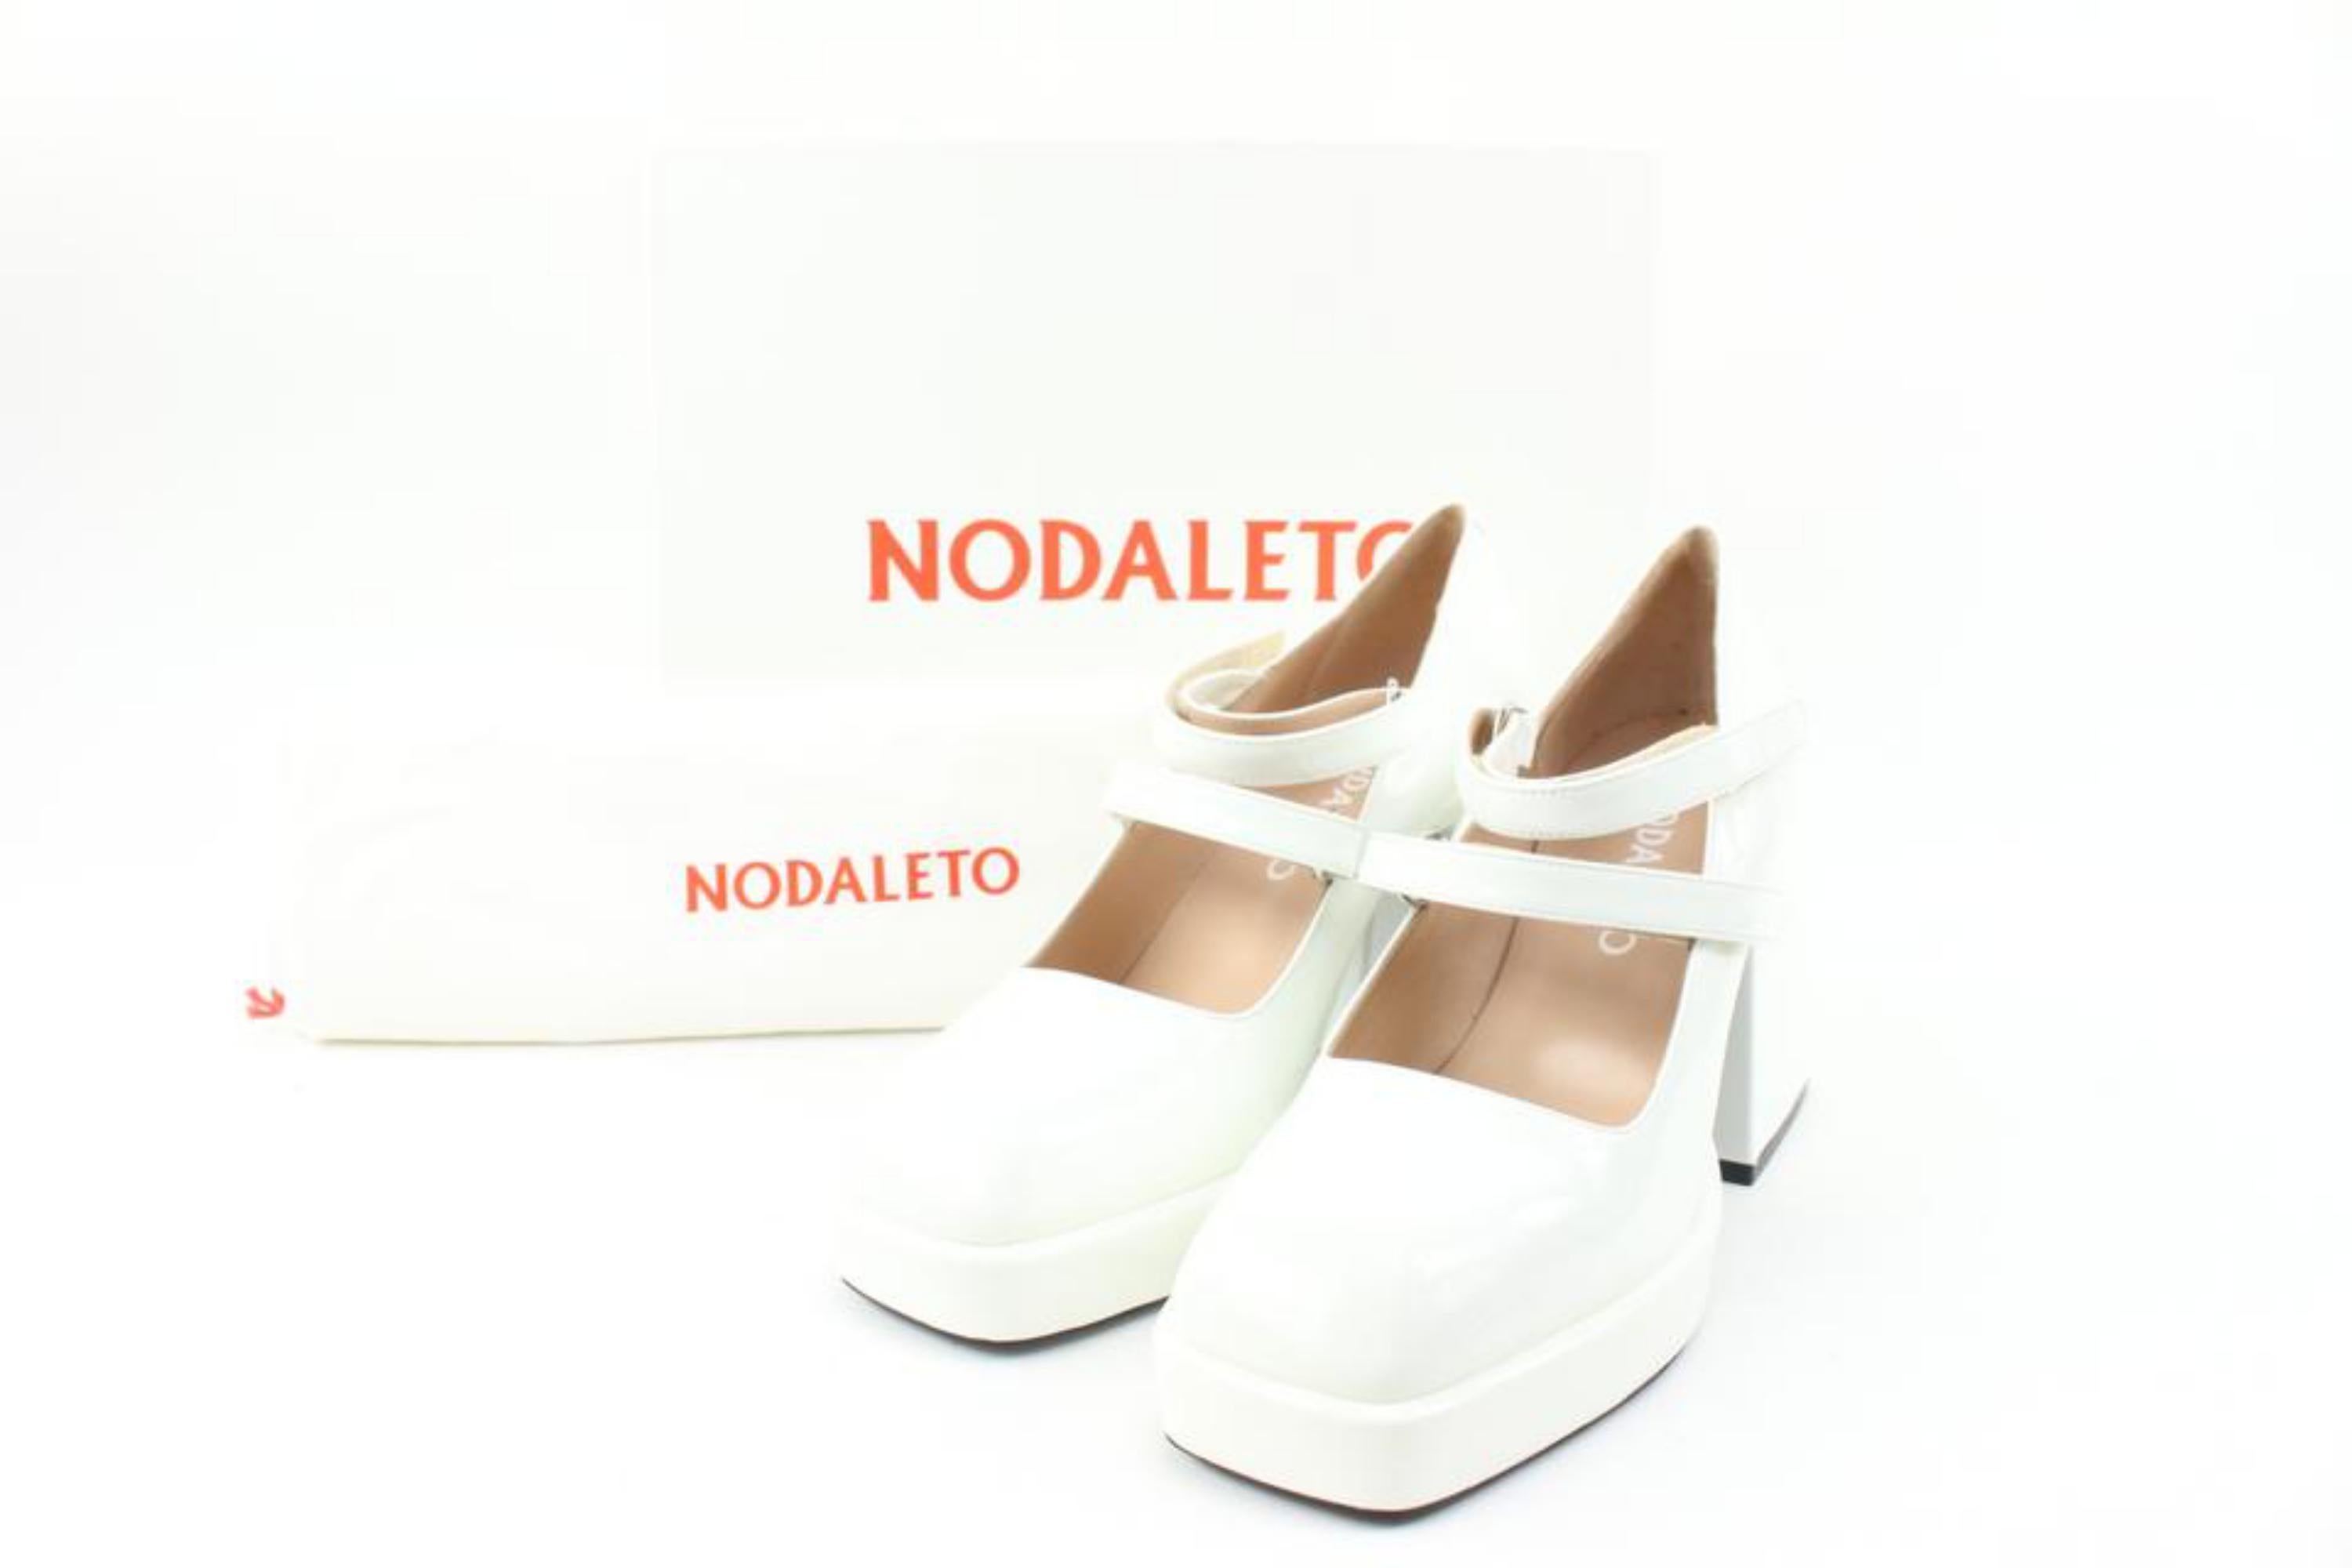 Nodaleto Size 36 Ceramic Patent Leather Bulla Babies Platforms 36n37s
Made In: Venice
Measurements: Length:  9.5